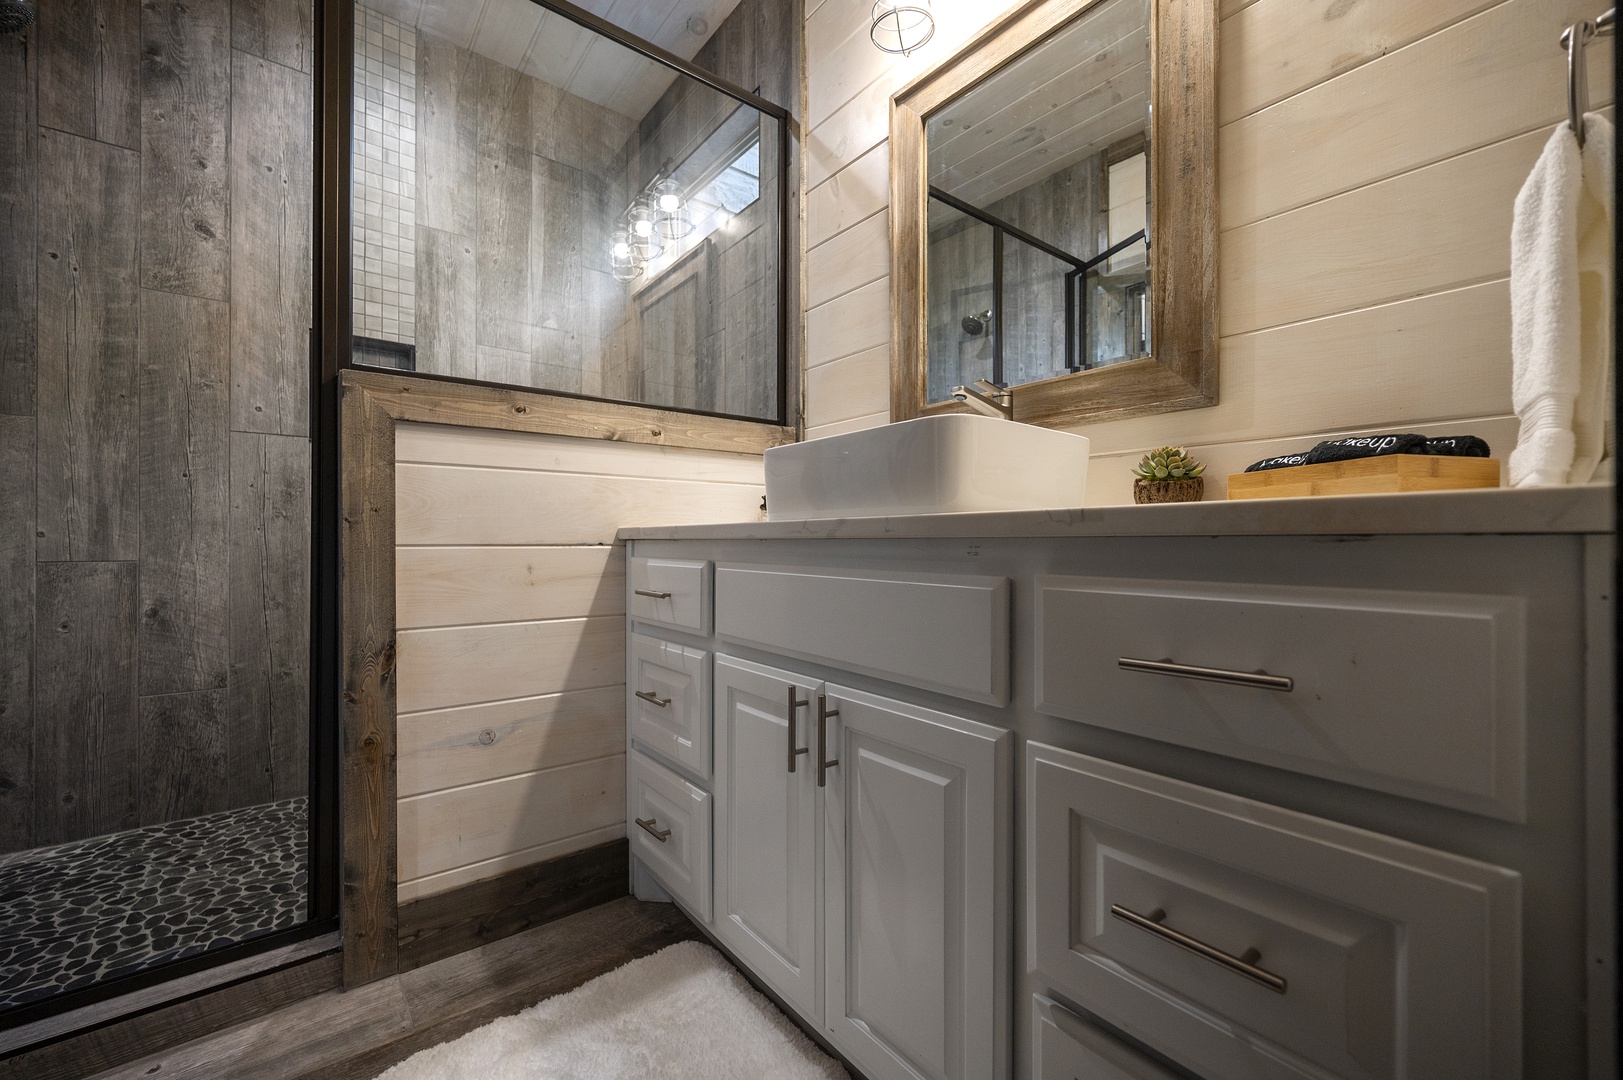 Full ensuite bathroom for boys' bunk room with walk-in shower